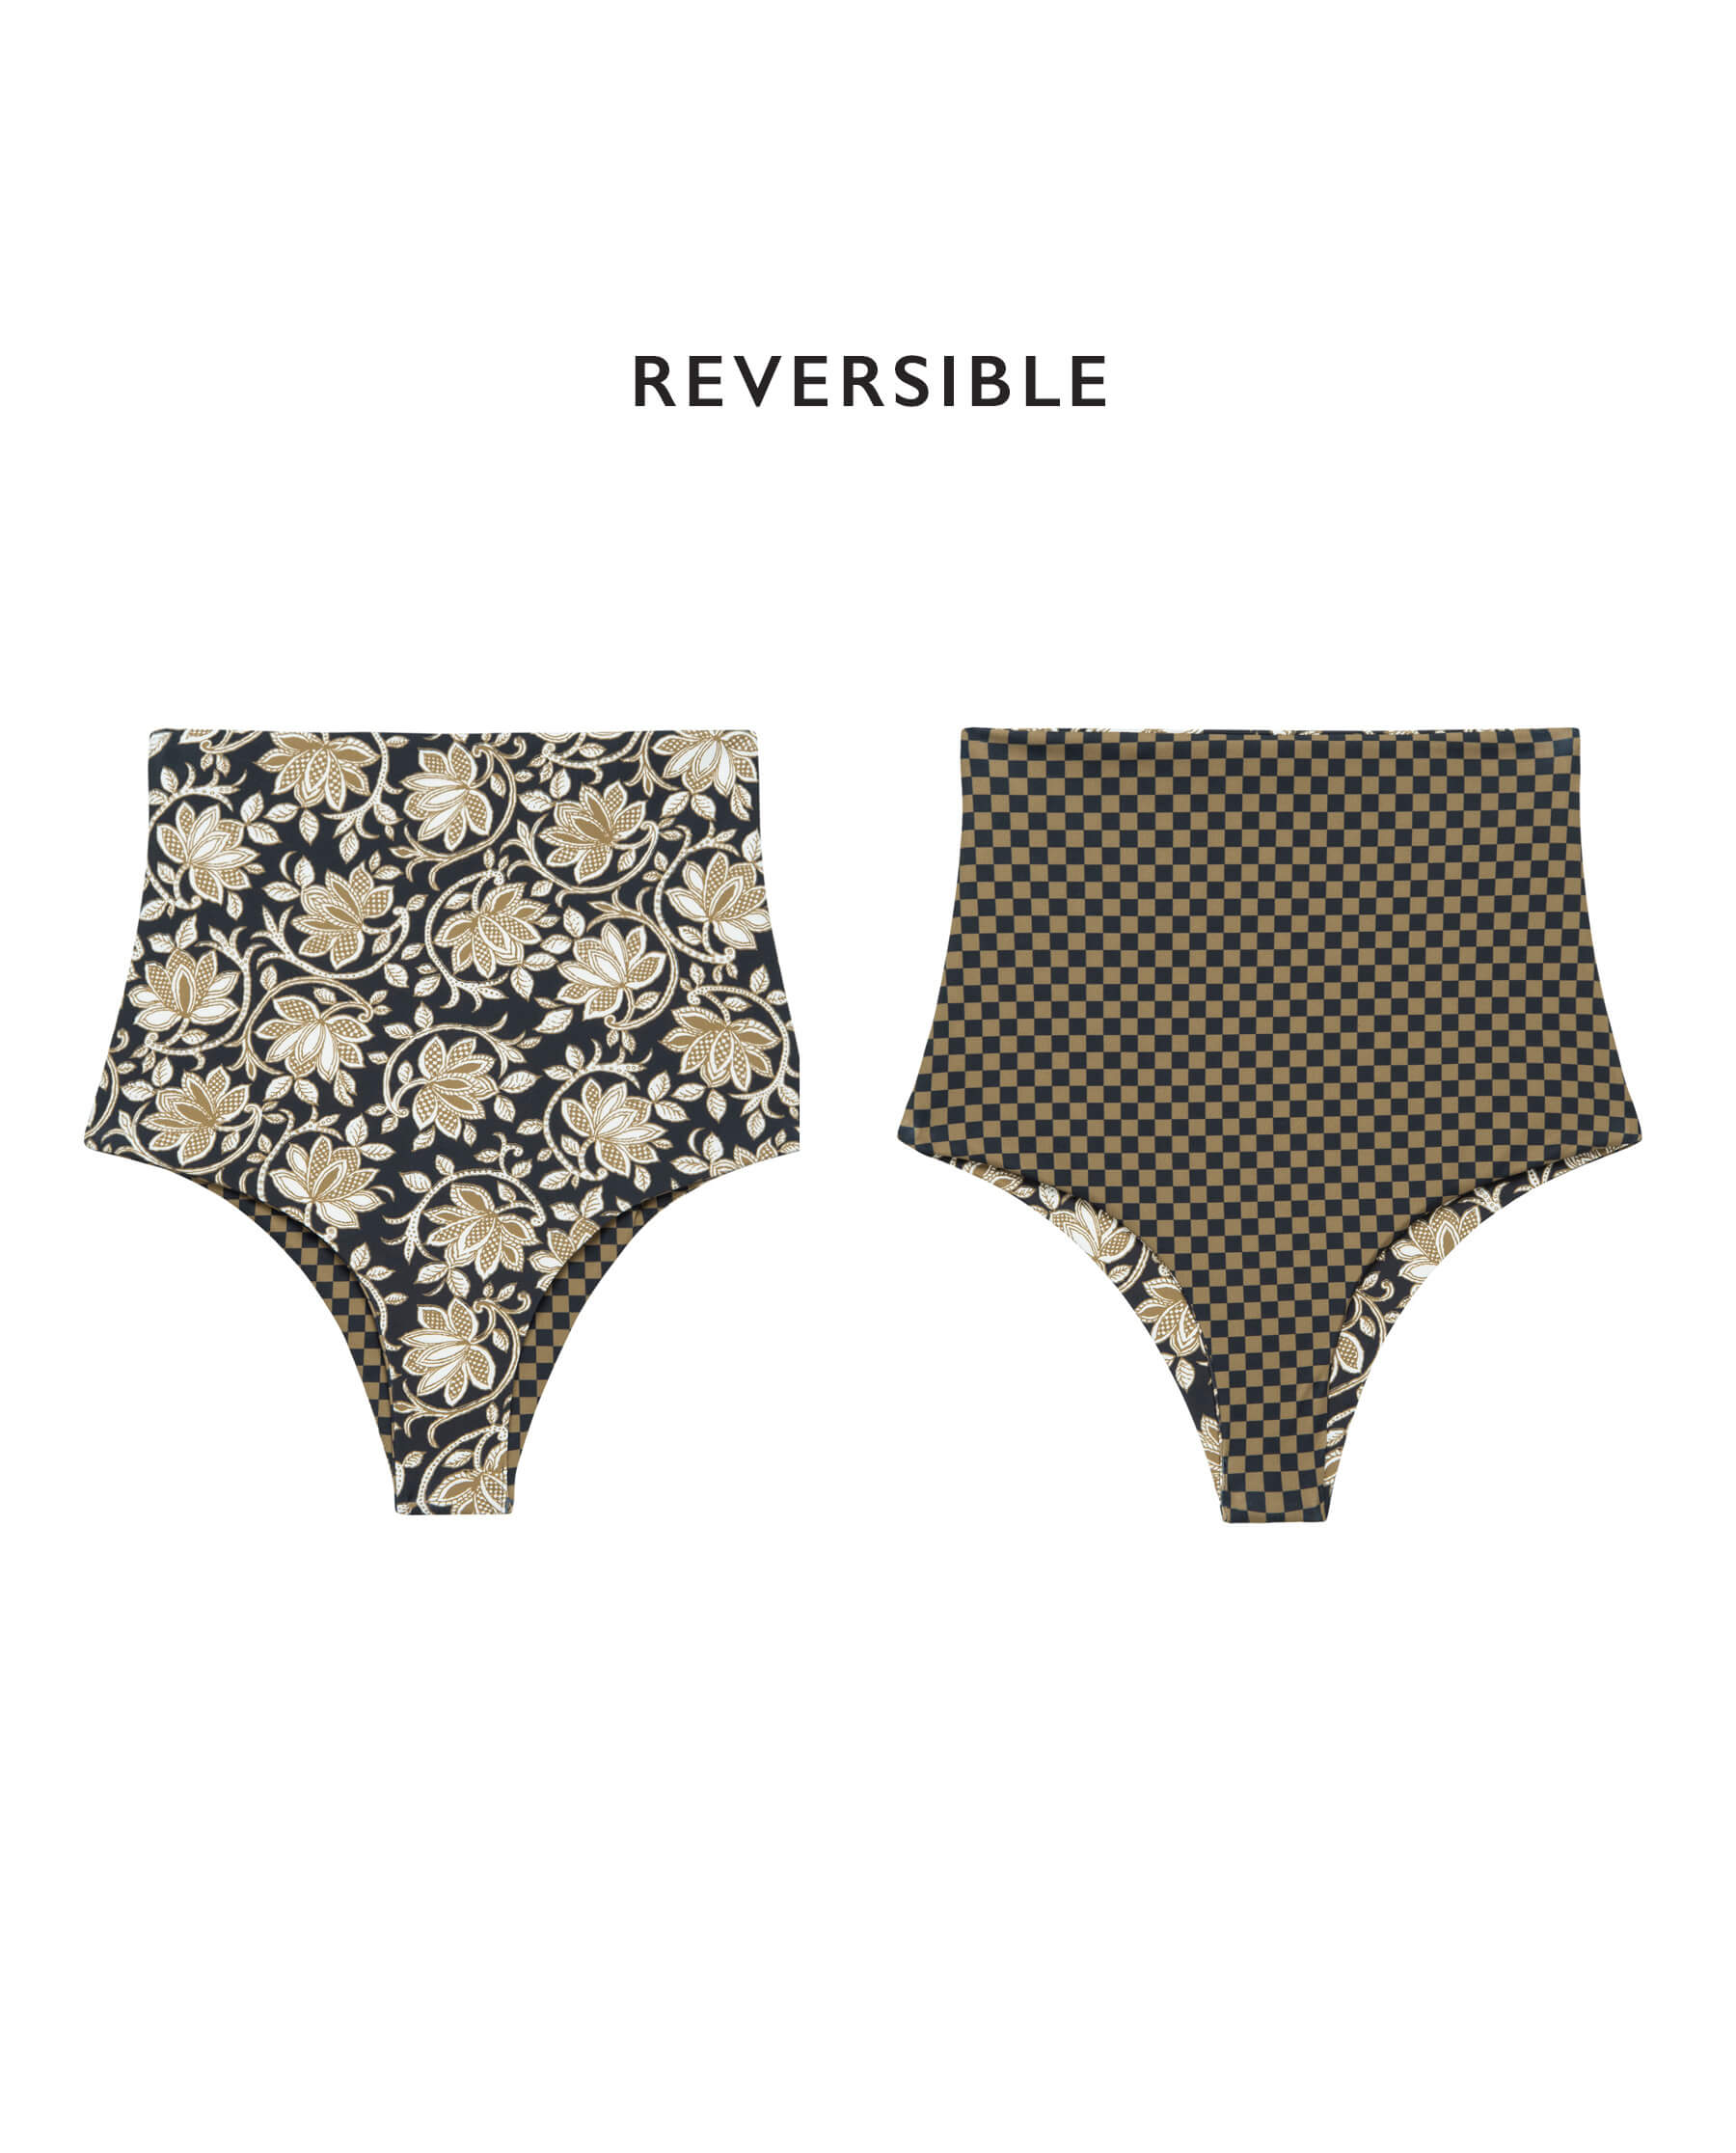 The Reversible High-Rise Brief. -- Black Oasis Floral and Bronze Check SWIM BOTTOMS THE GREAT. SP24 SWIM